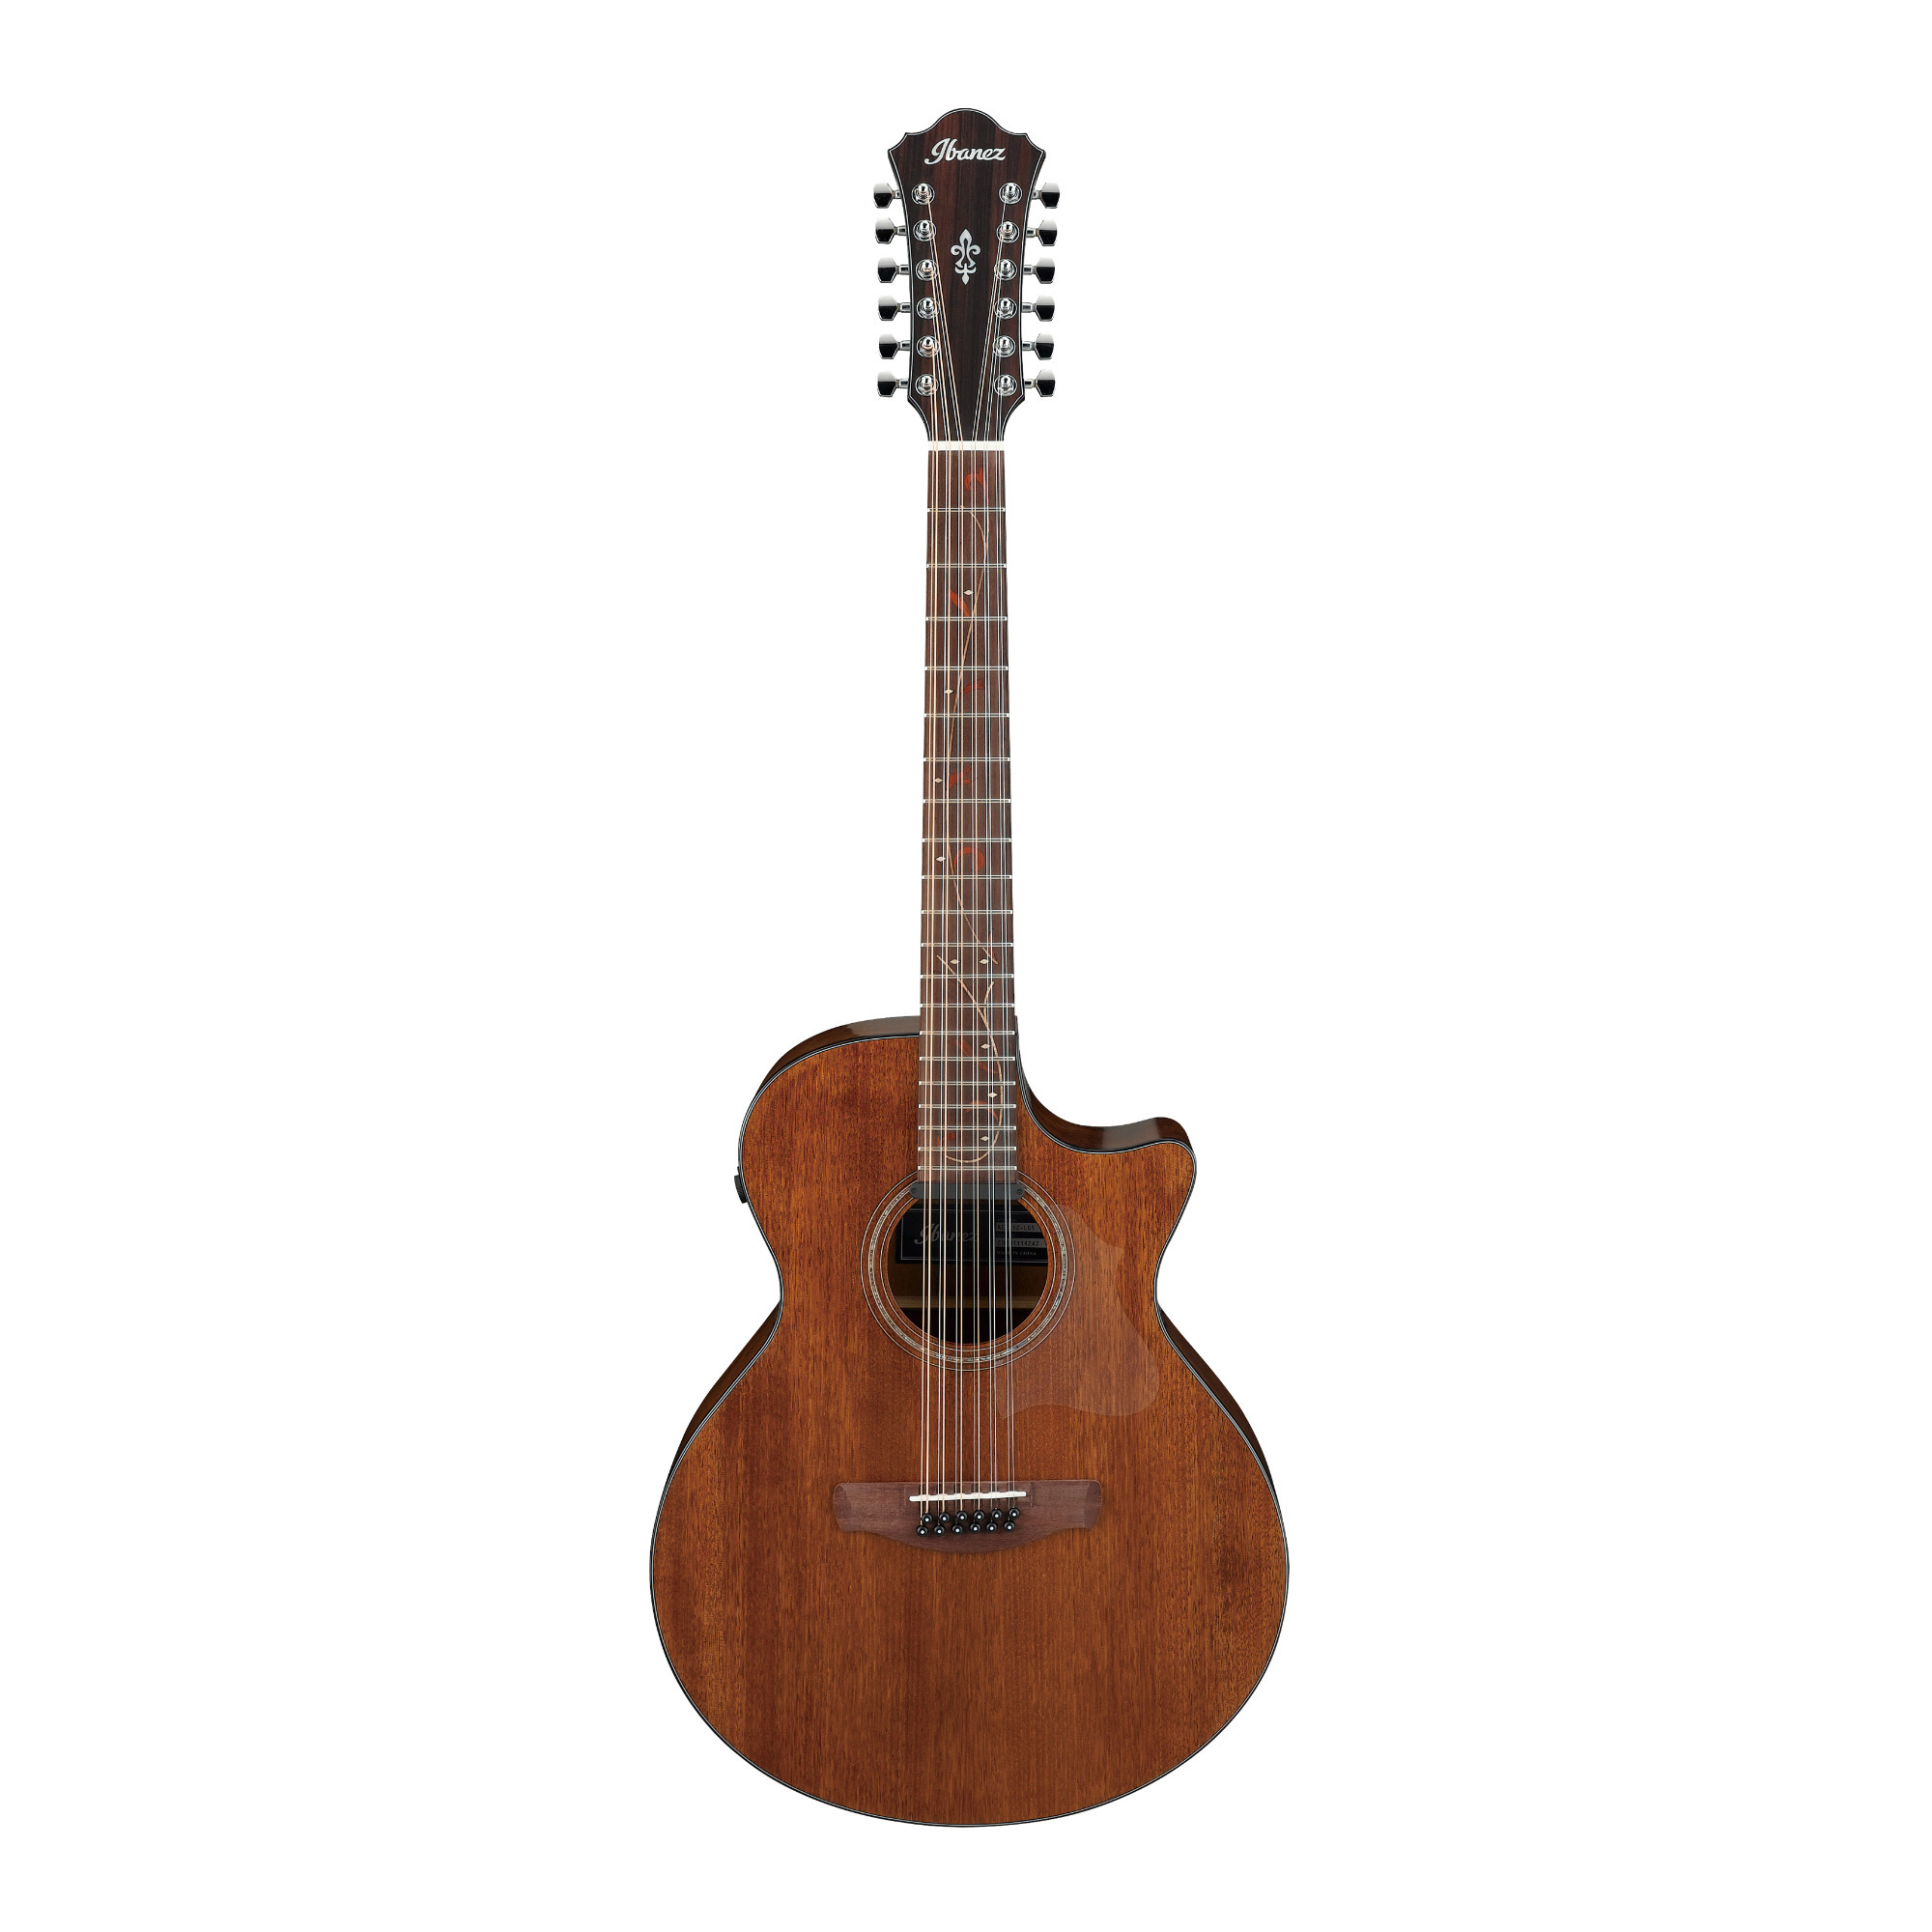 Ibanez AE2912 12-String Acoustic-Electric Guitar (Right-Hand, Natural Low Gloss) -  AE2912LGS